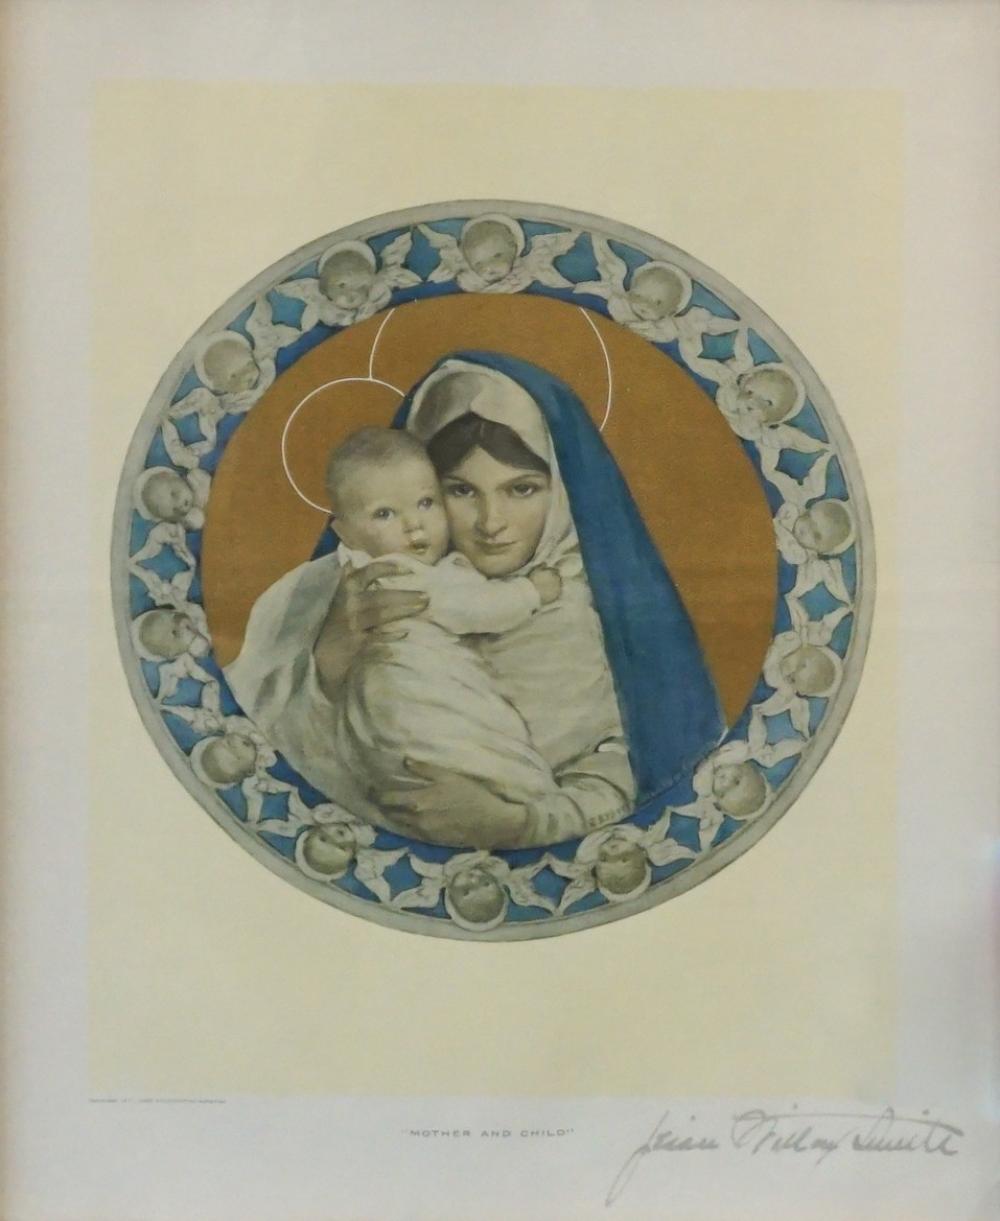 MOTHER AND CHILD, MIXED MEDIA PRINT,